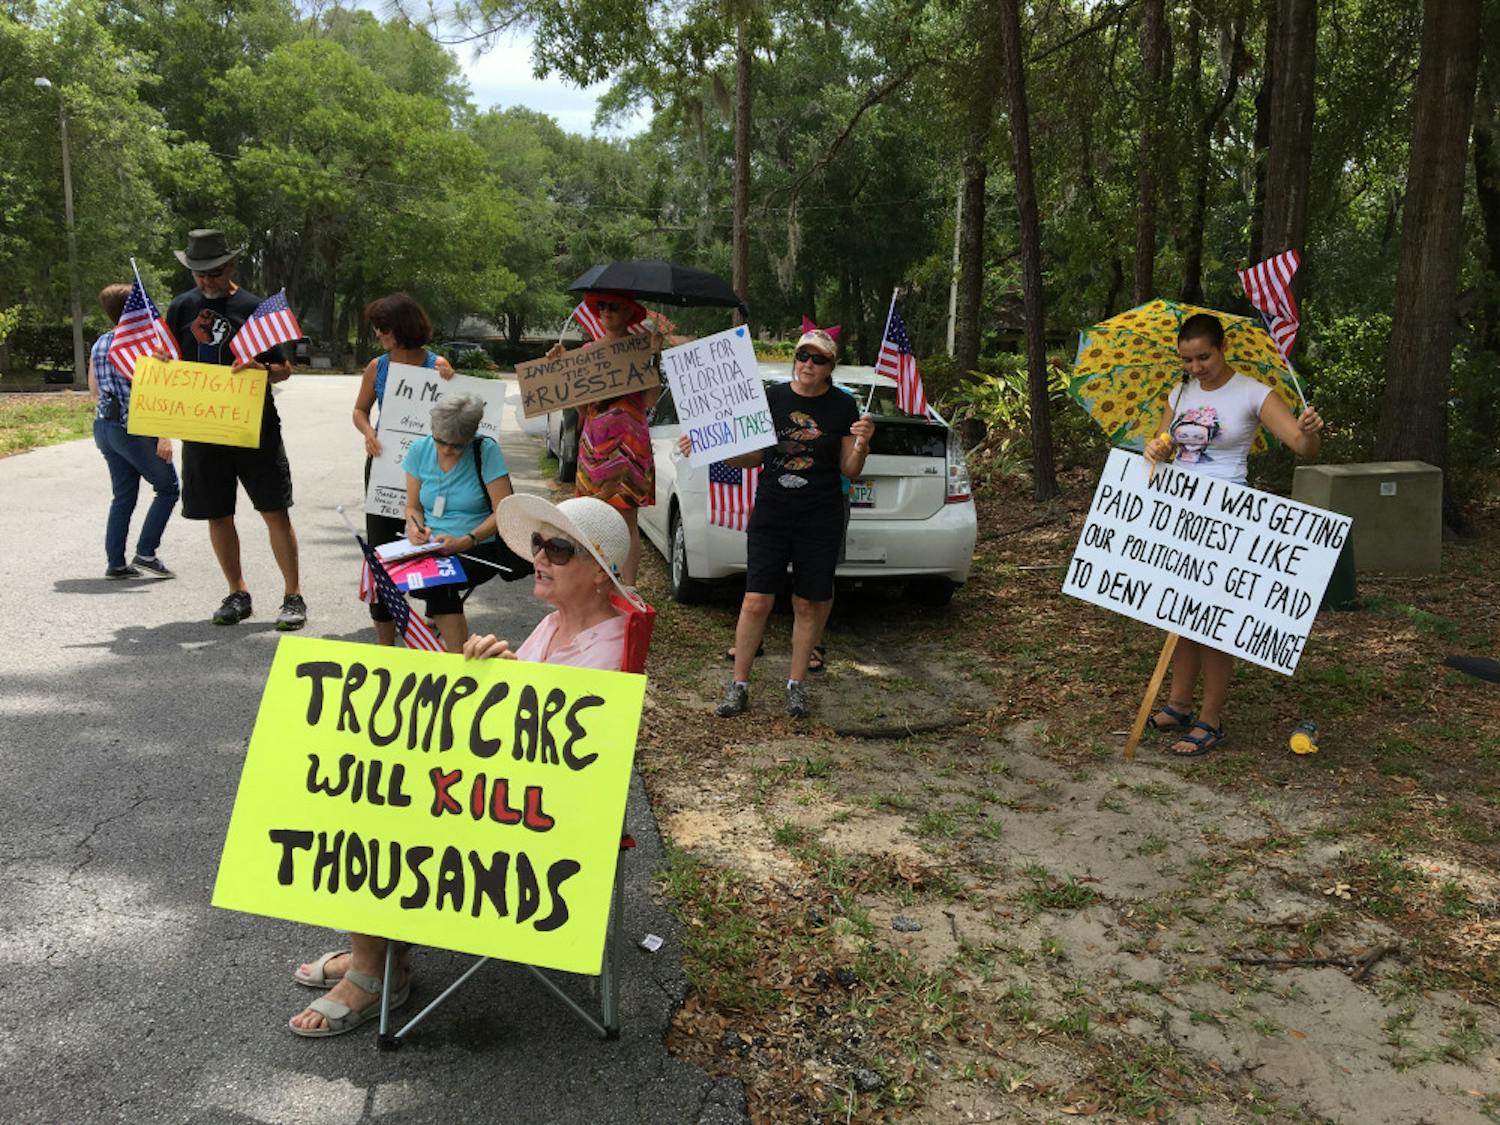 Gainesville residents meet outside U.S. Rep. Ted Yoho's office during their lunch hour on Tuesday afternoon to protest by waving signs stating their political opinions.